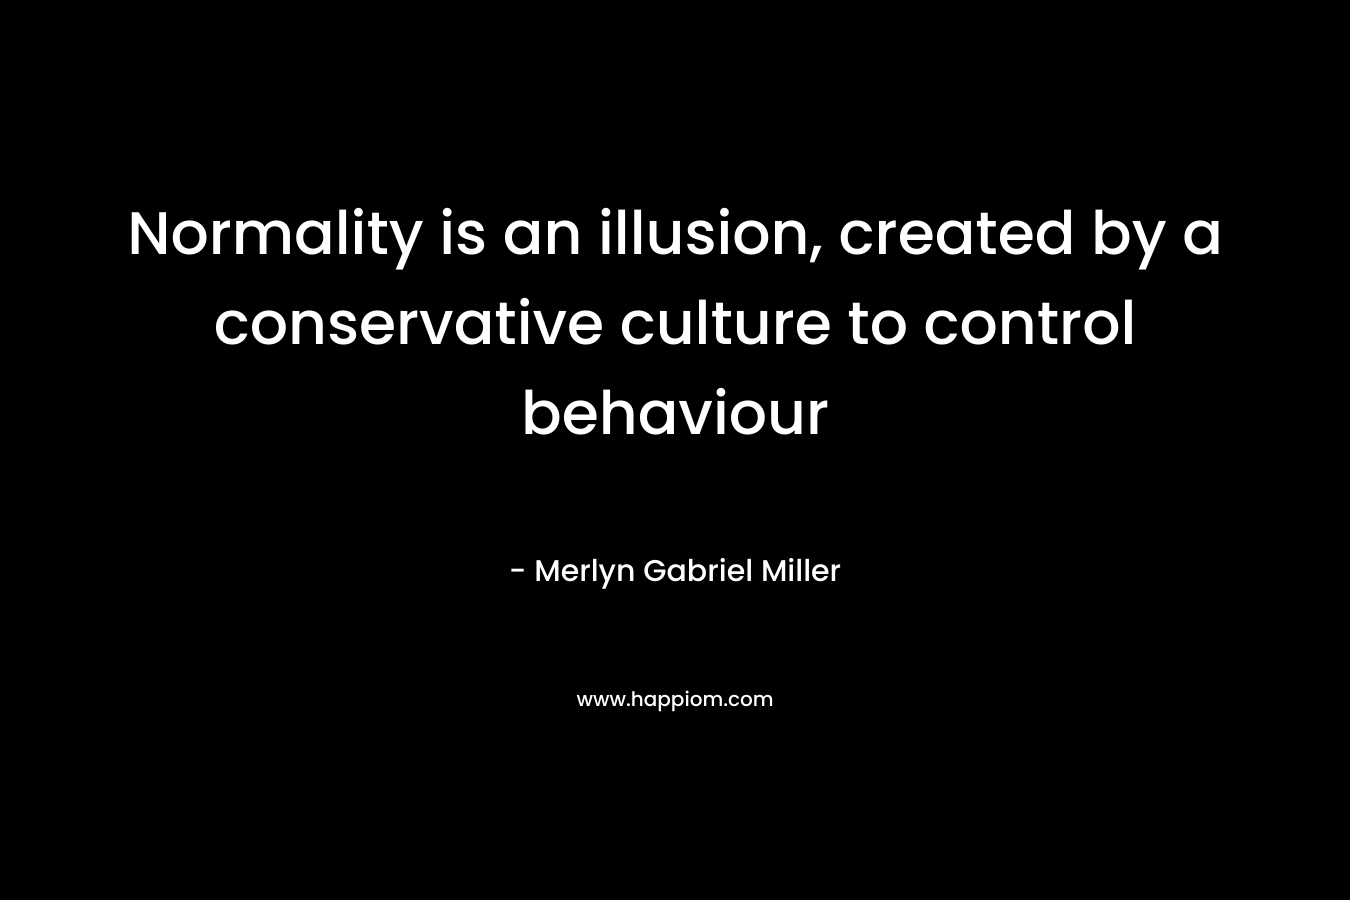 Normality is an illusion, created by a conservative culture to control behaviour